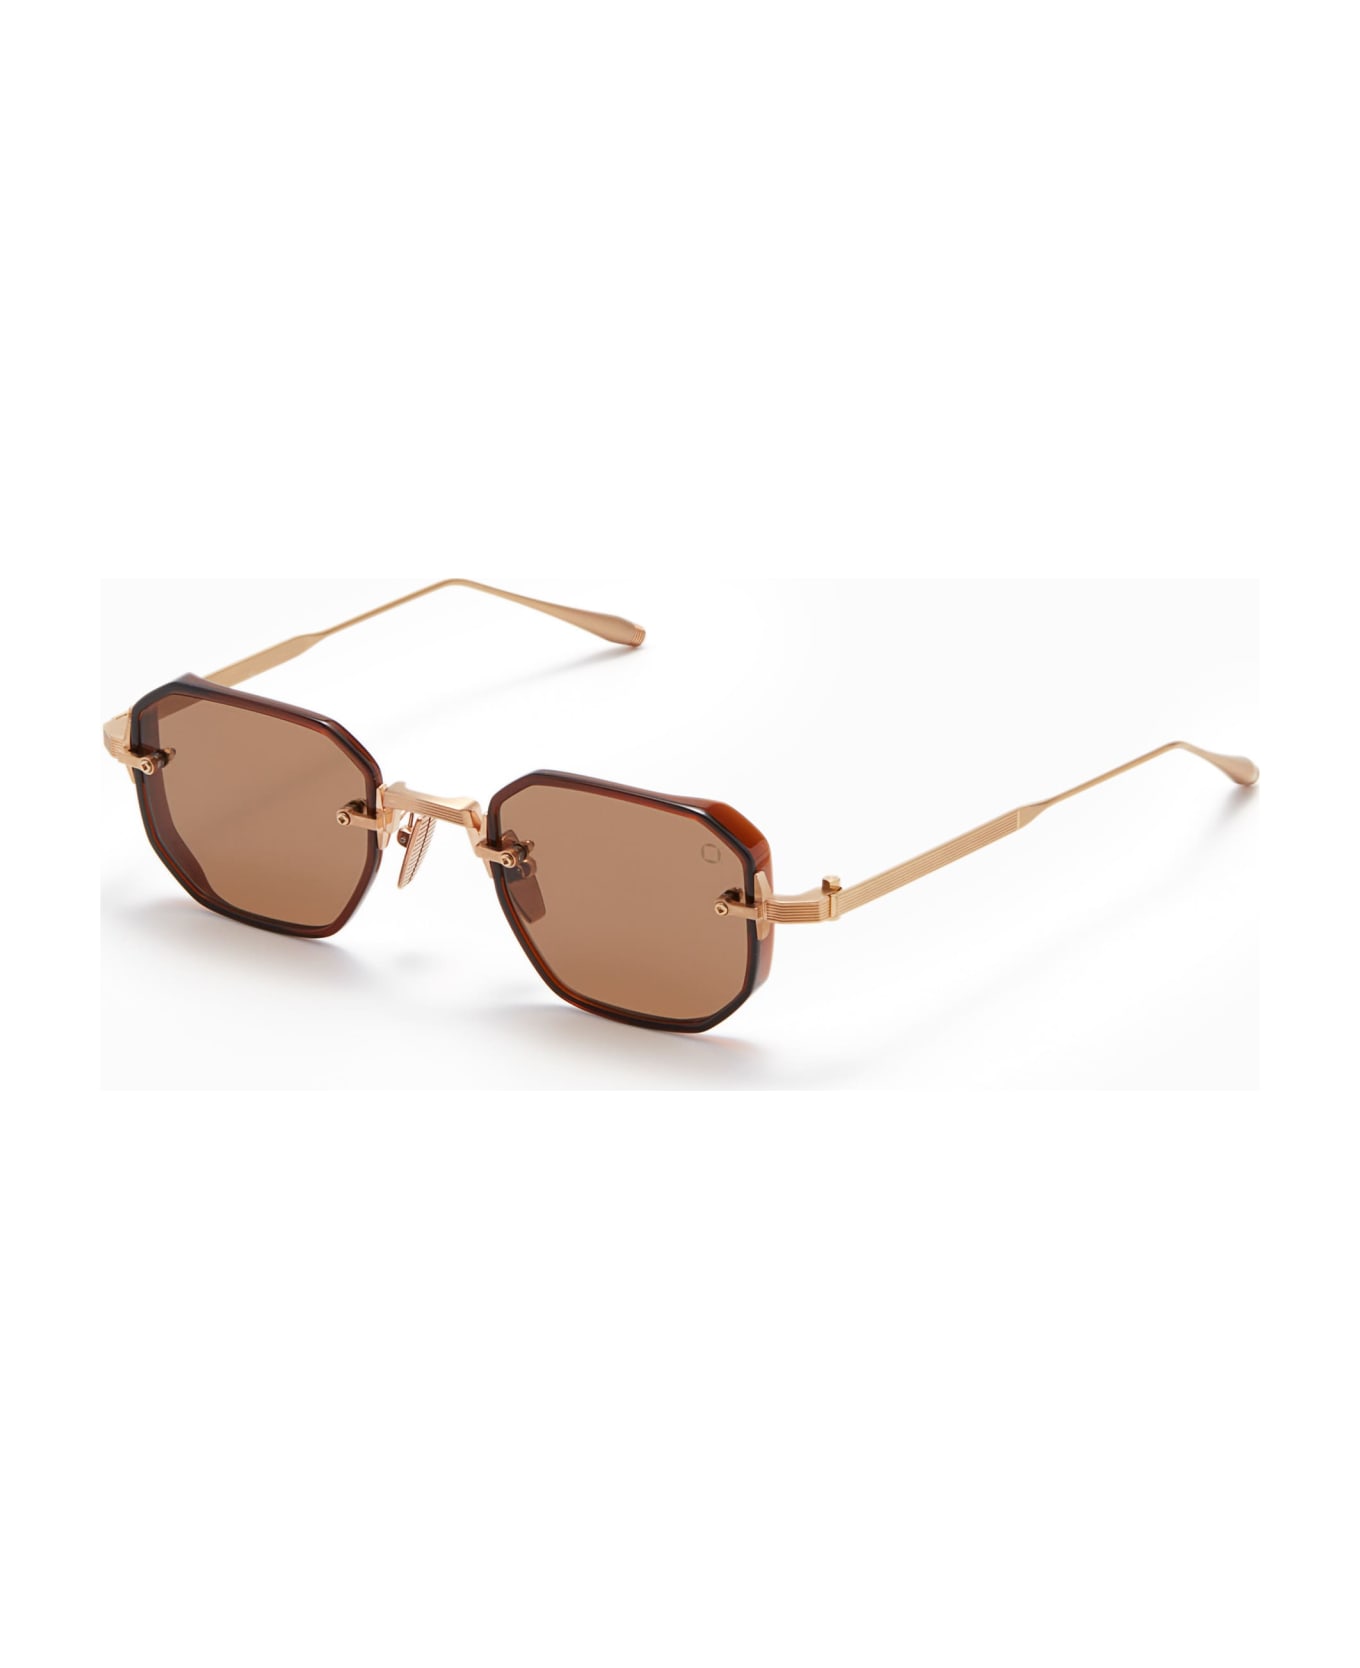 Akoni Juno-two - Brushed Gold / Brown Crystal Sunglasses - Gold